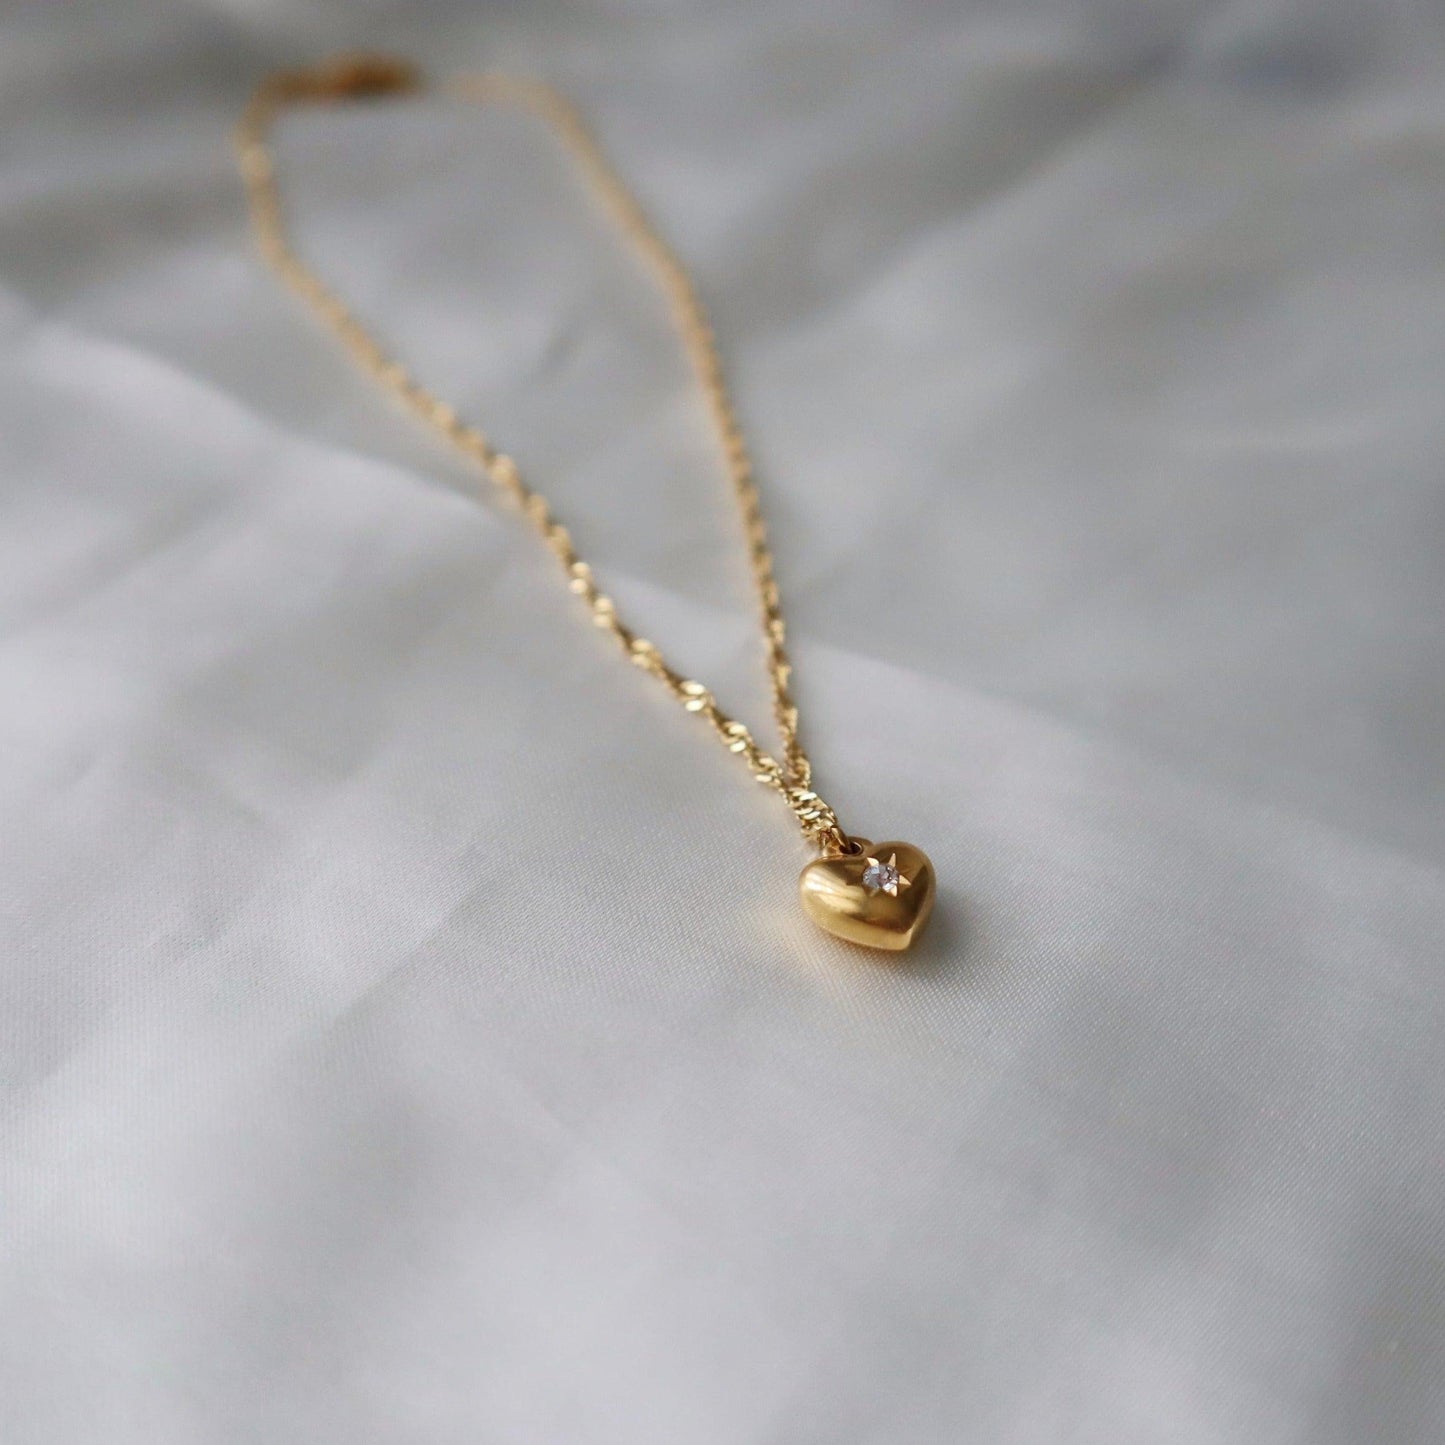 Starry Heart Necklace | Pendant Necklace - JESSA JEWELRY | GOLD JEWELRY; dainty, affordable gold everyday jewelry. Tarnish free, water-resistant, hypoallergenic. Jewelry for everyday wear